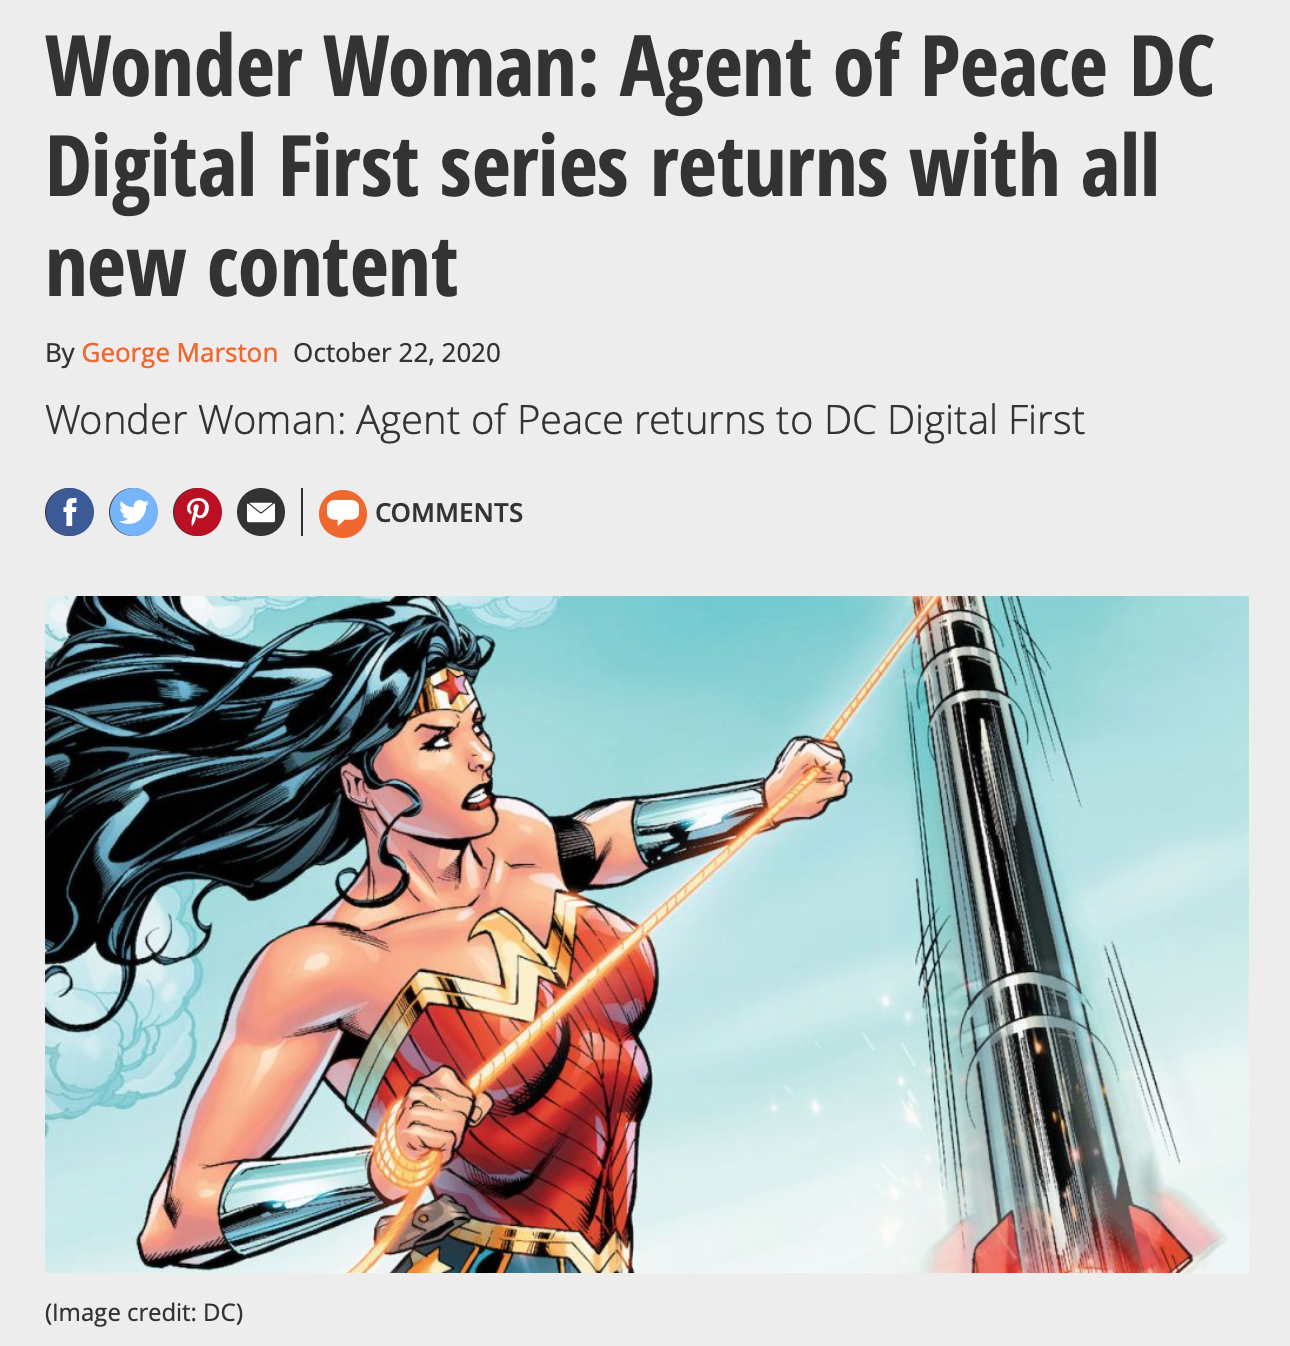 GAMESRADAR: Wonder Woman: Agent of Peace DC Digital First series returns with all new content